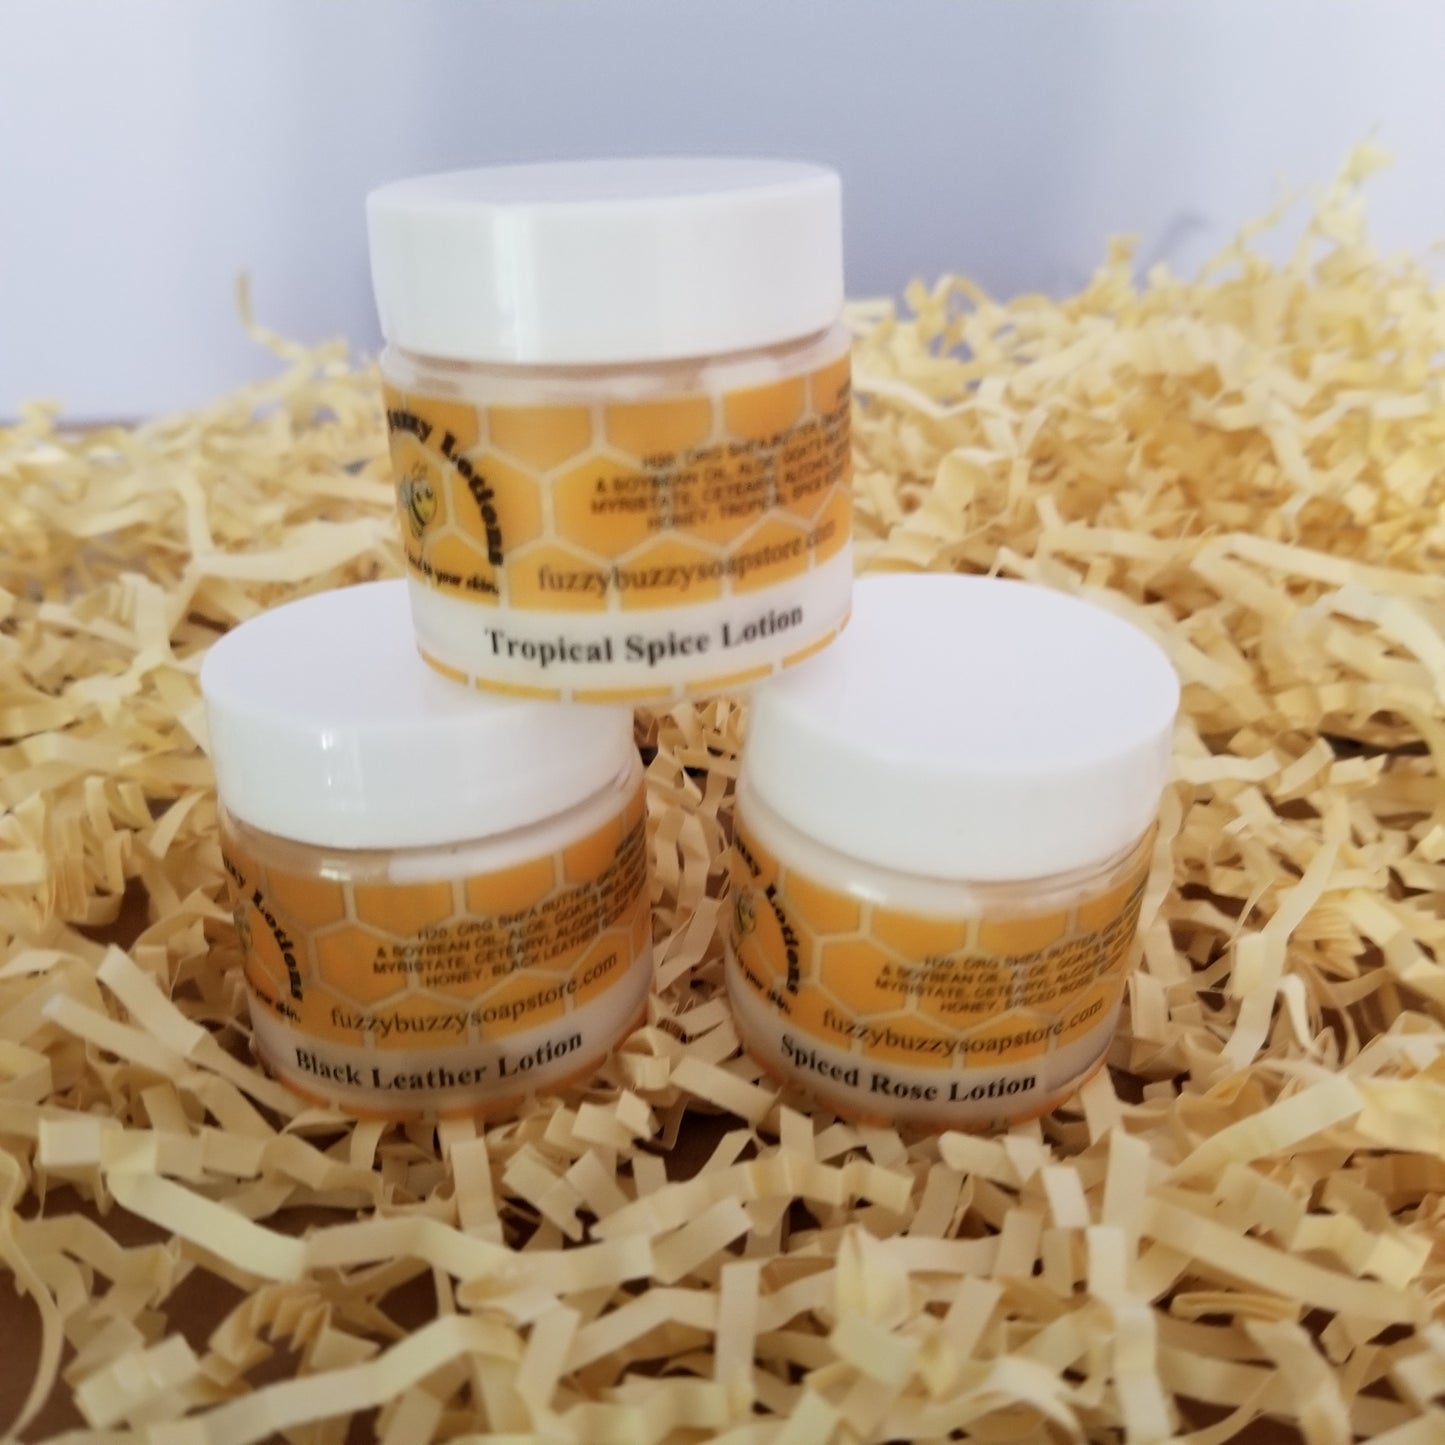 Goats Milk and Honey Lotion Samples